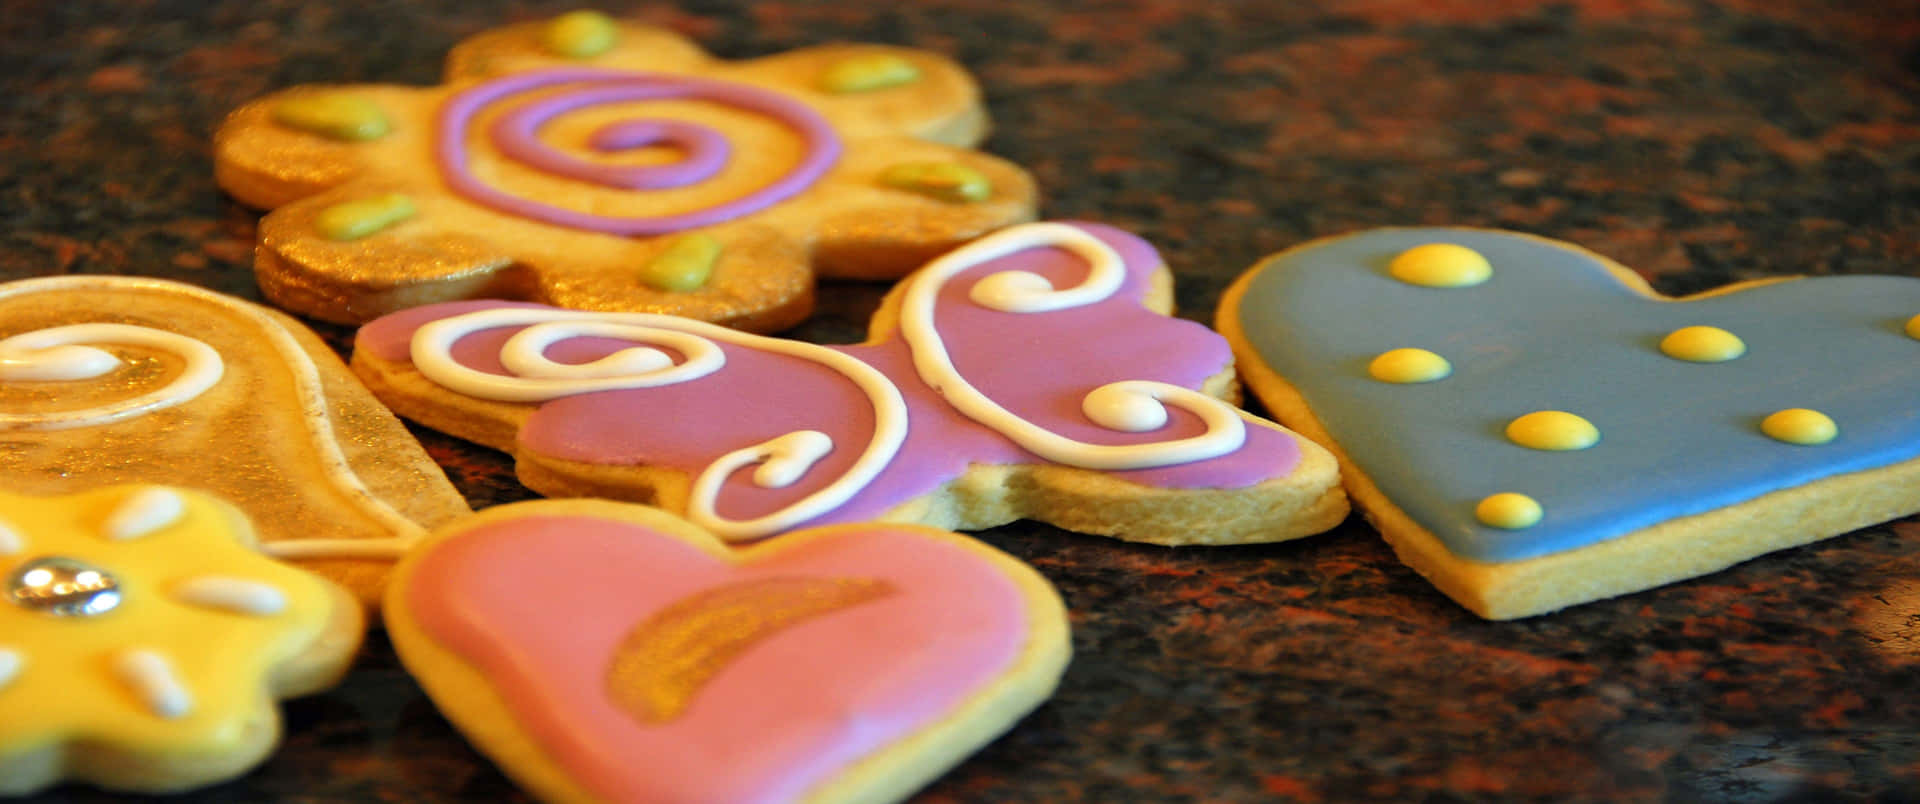 Delicious Array of Cookies on Vibrant Background